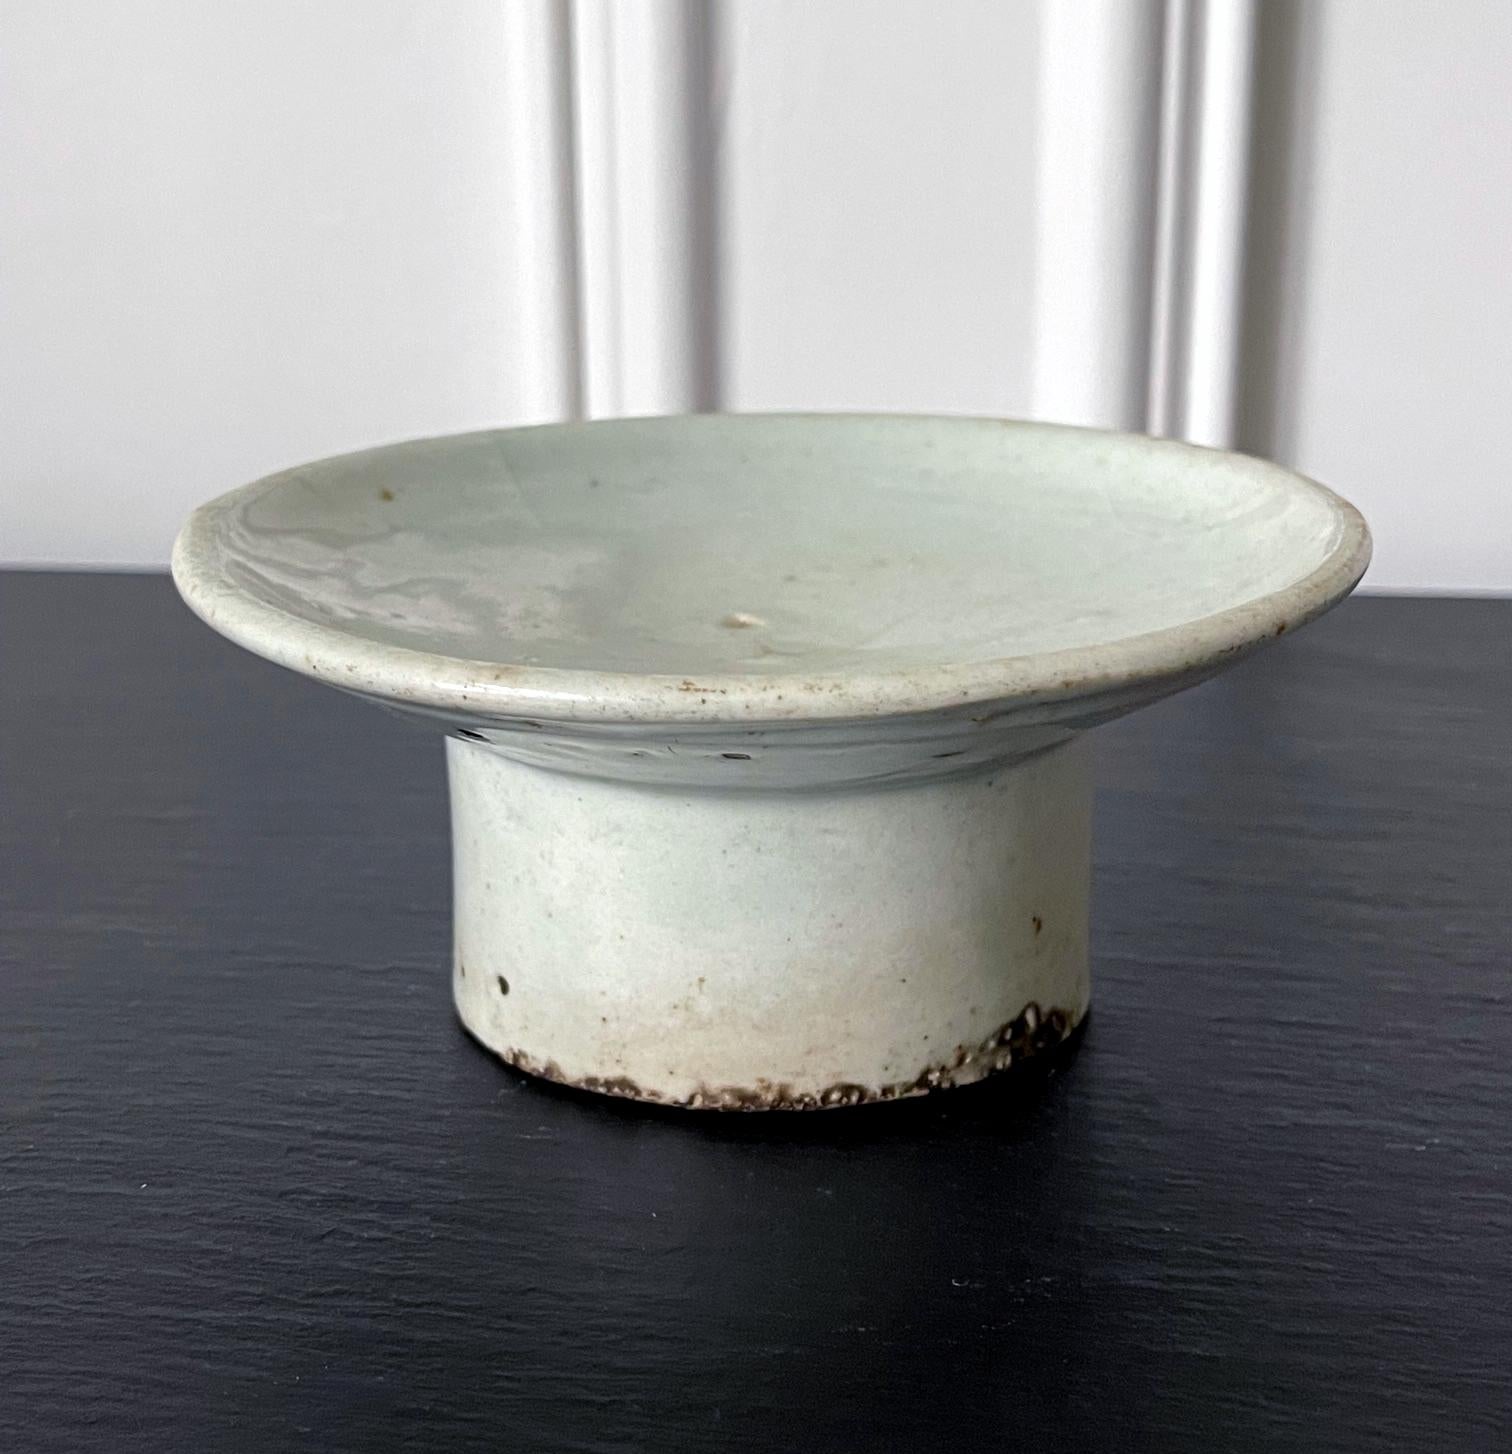 A ceramic dish with high cylindrical foot in white glaze from Korea, circa 19th century late Joseon Dynasty. By shape, this piece appears to be a ceremonial vessel that was used to make offerings on the altar. Although without inscription, we can't